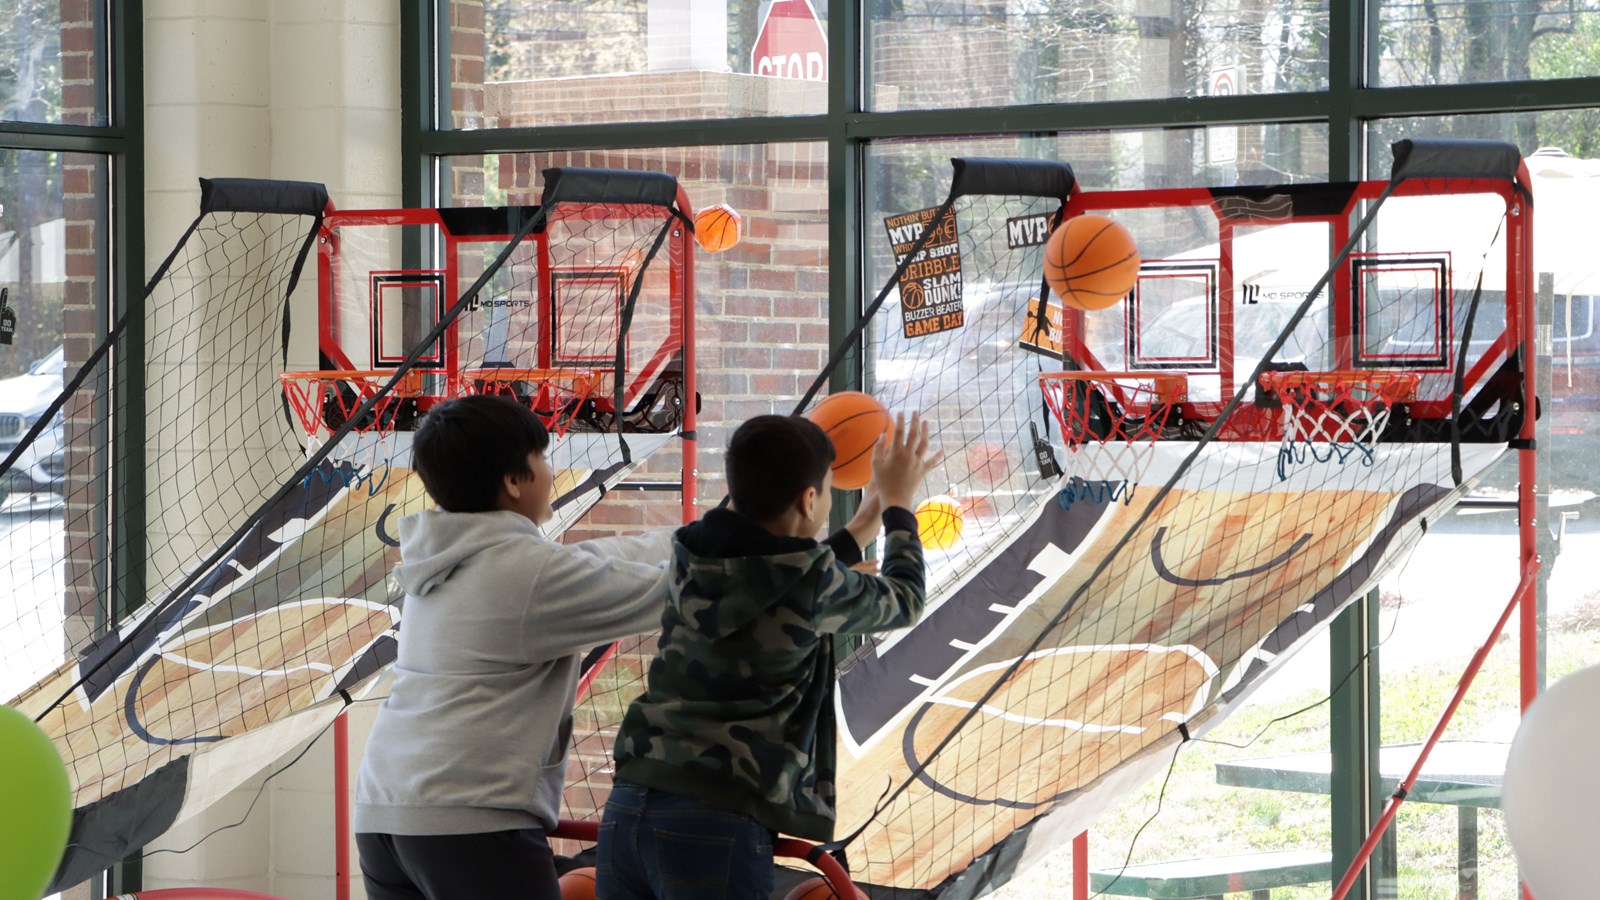 Pine Mountain Middle School students play basketball inside the school's game center.